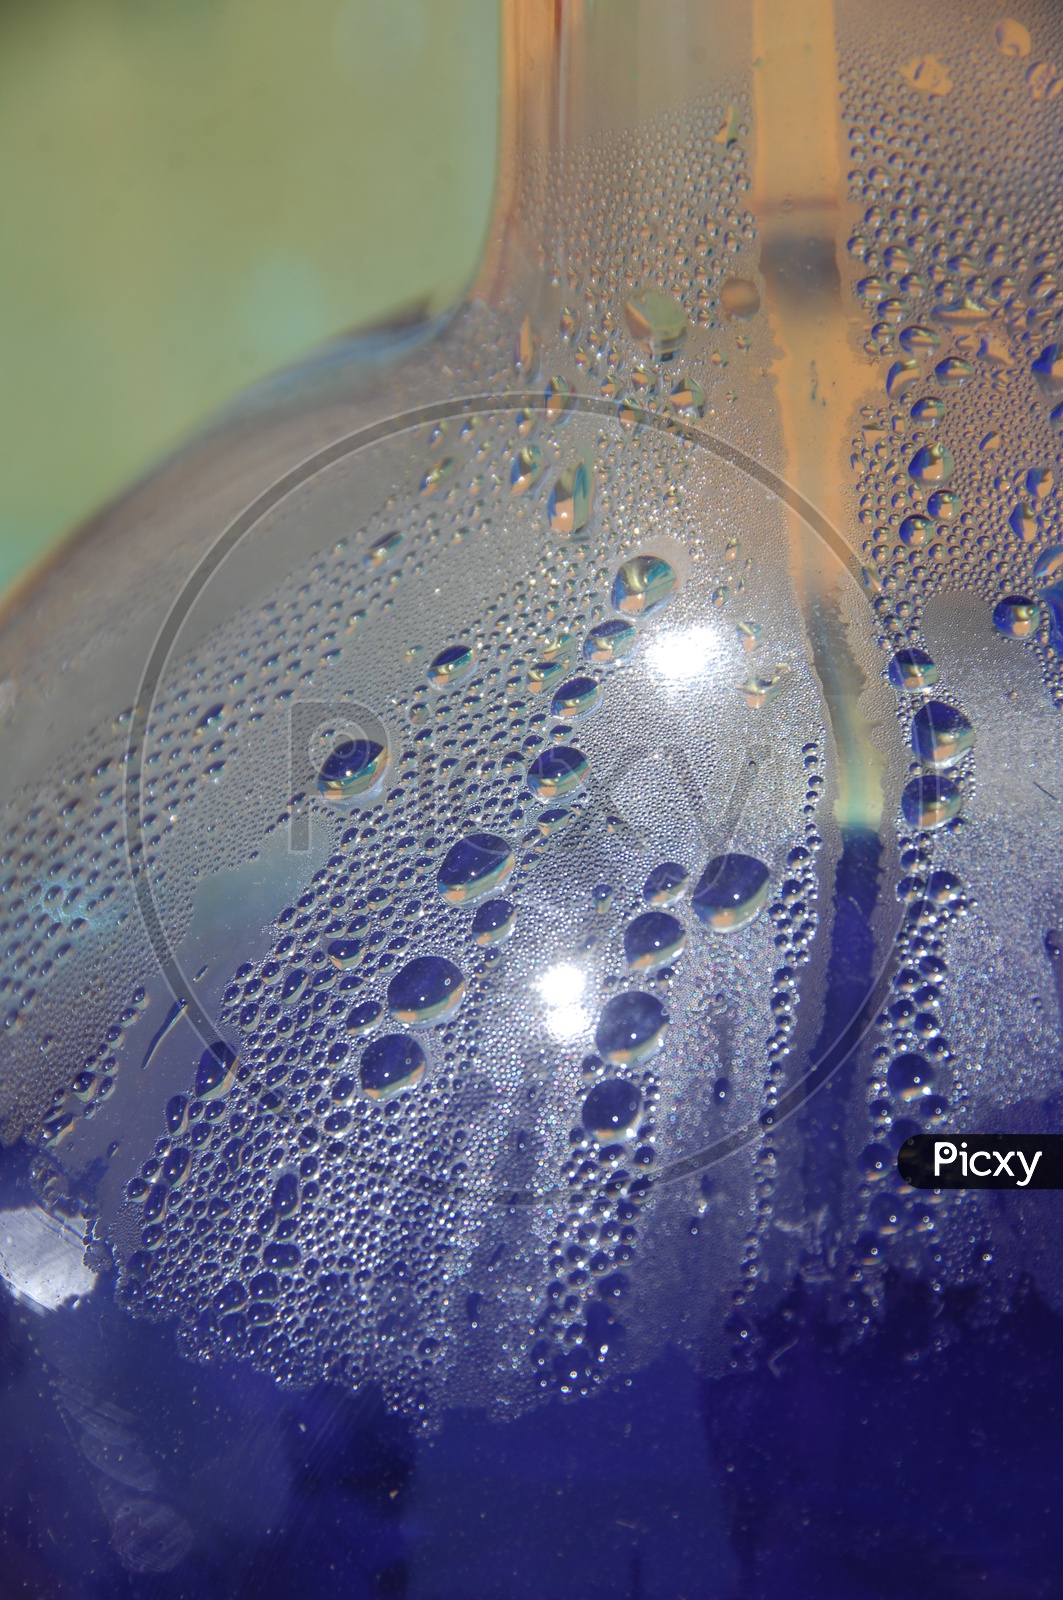 Water droplets inside a glass surface abstract background